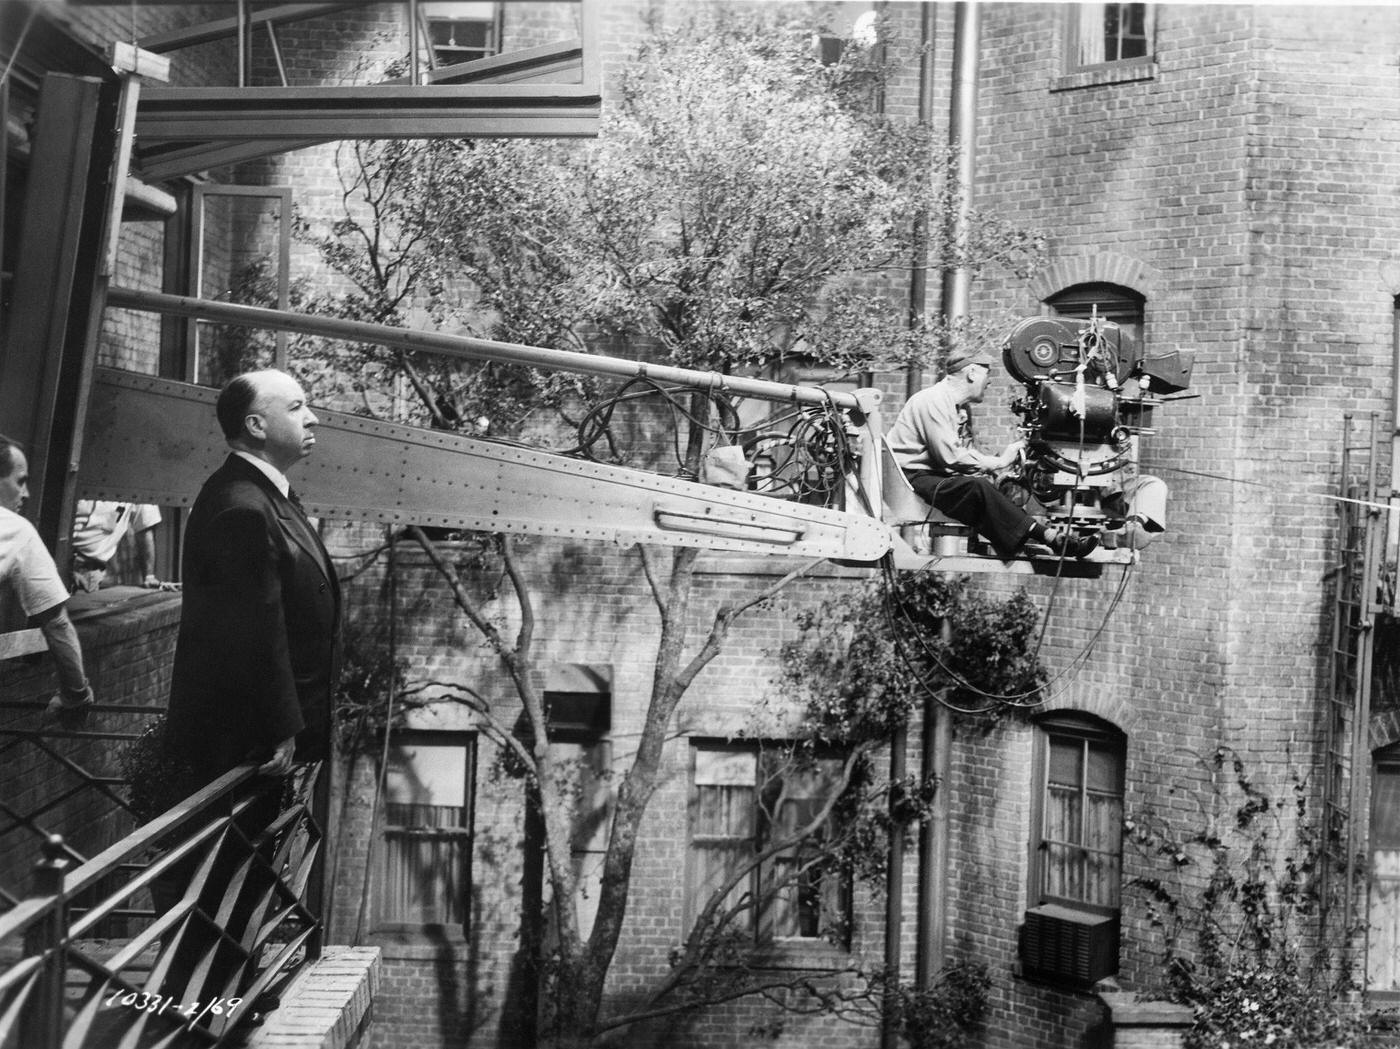 Alfred Hitchcock observes the action from a balcony as cameramen extended out on an "arm" film a scene on the set of "Rear Window" 1954.